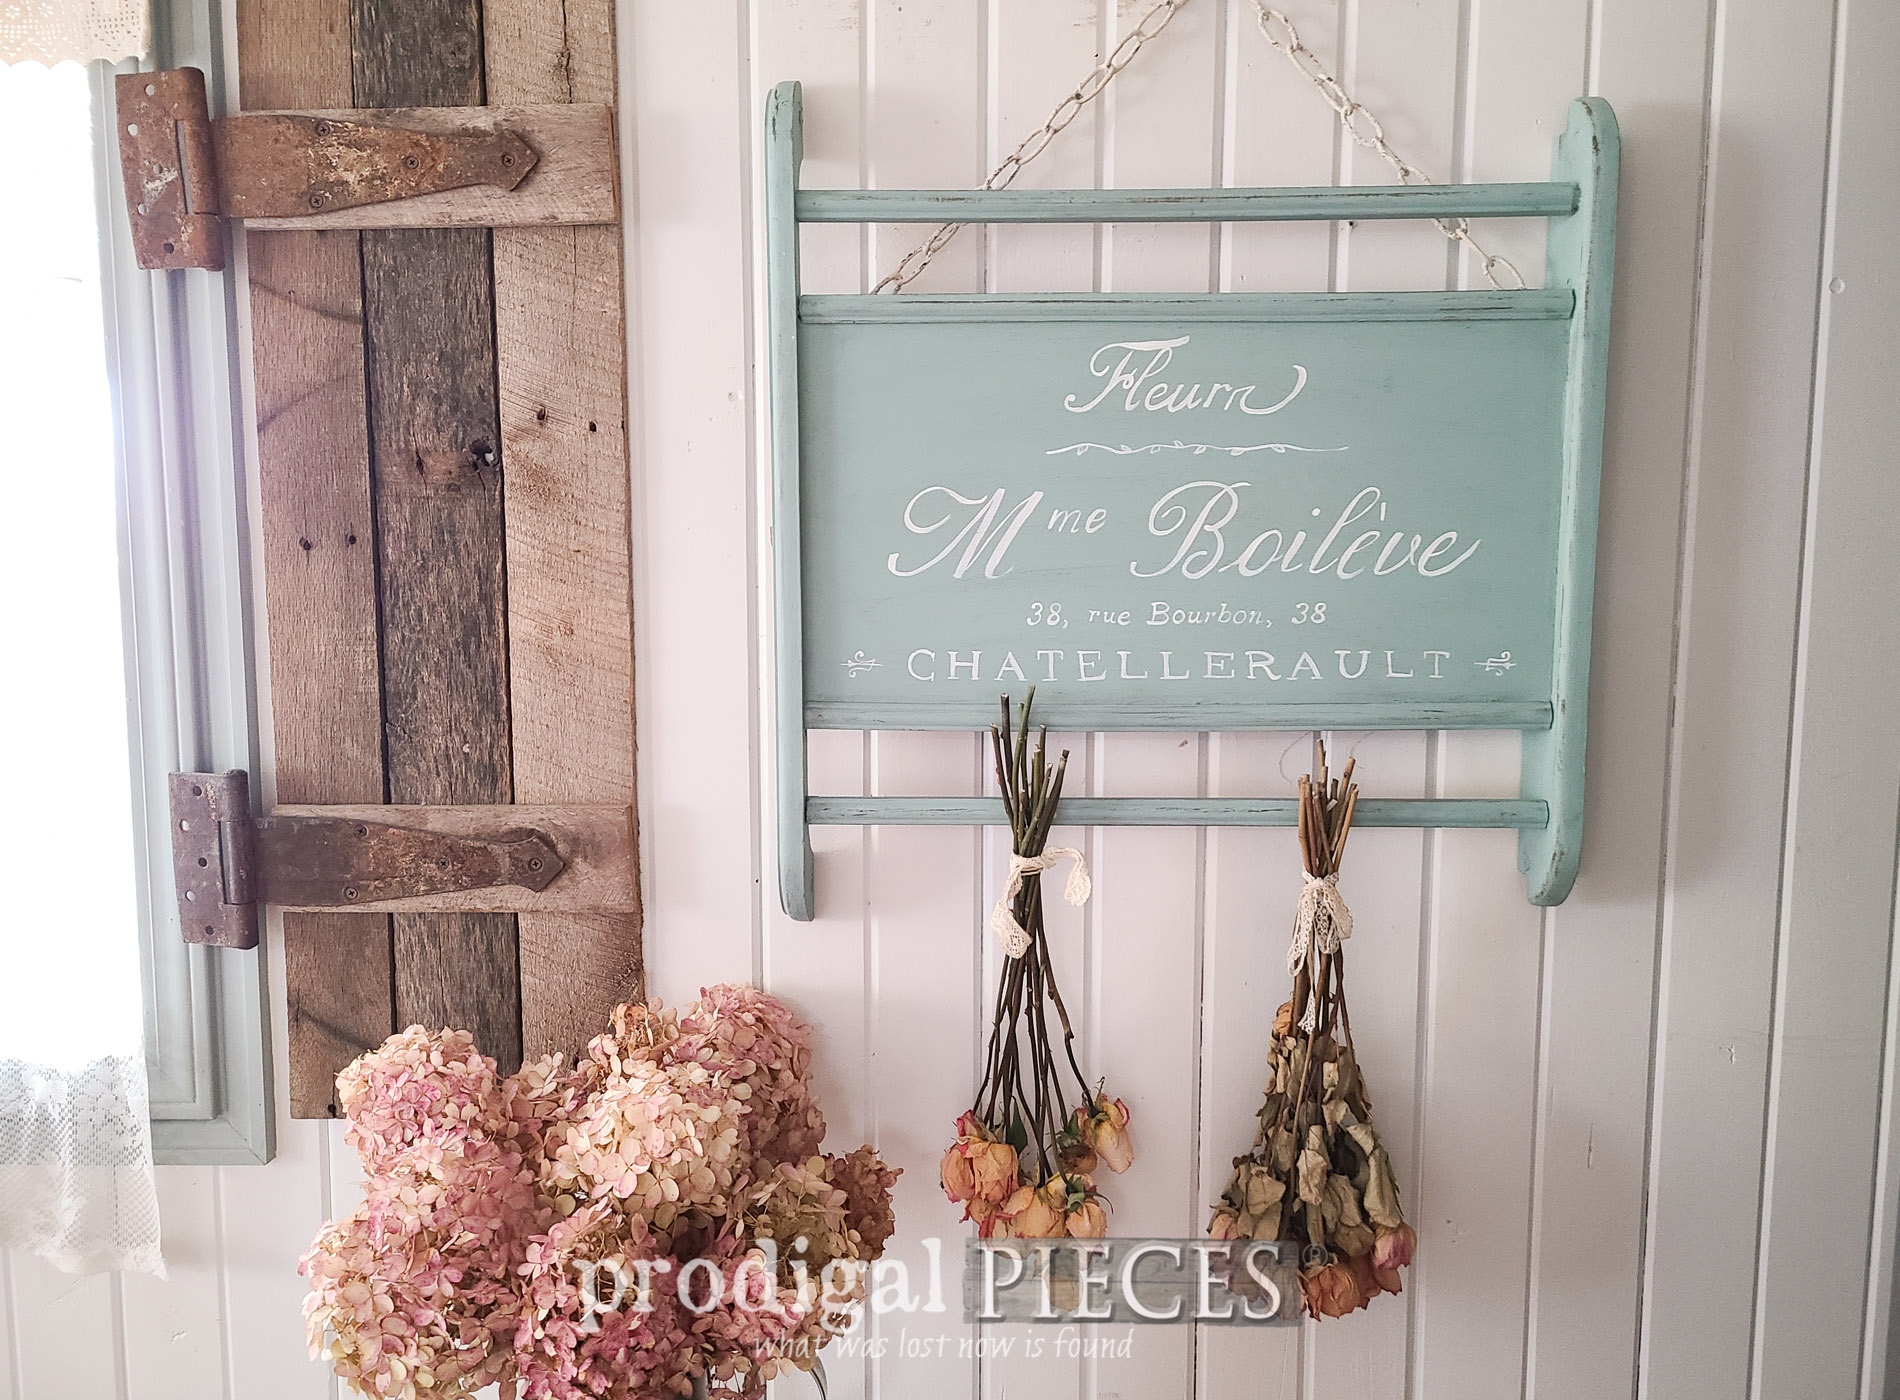 Featured Vintage Baby Crib Upcycled into 2 Home Decor Projects by Larissa of Prodigal Pieces | prodigalpieces.com #prodigalpieces #diy #upcycled #french #farmhouse